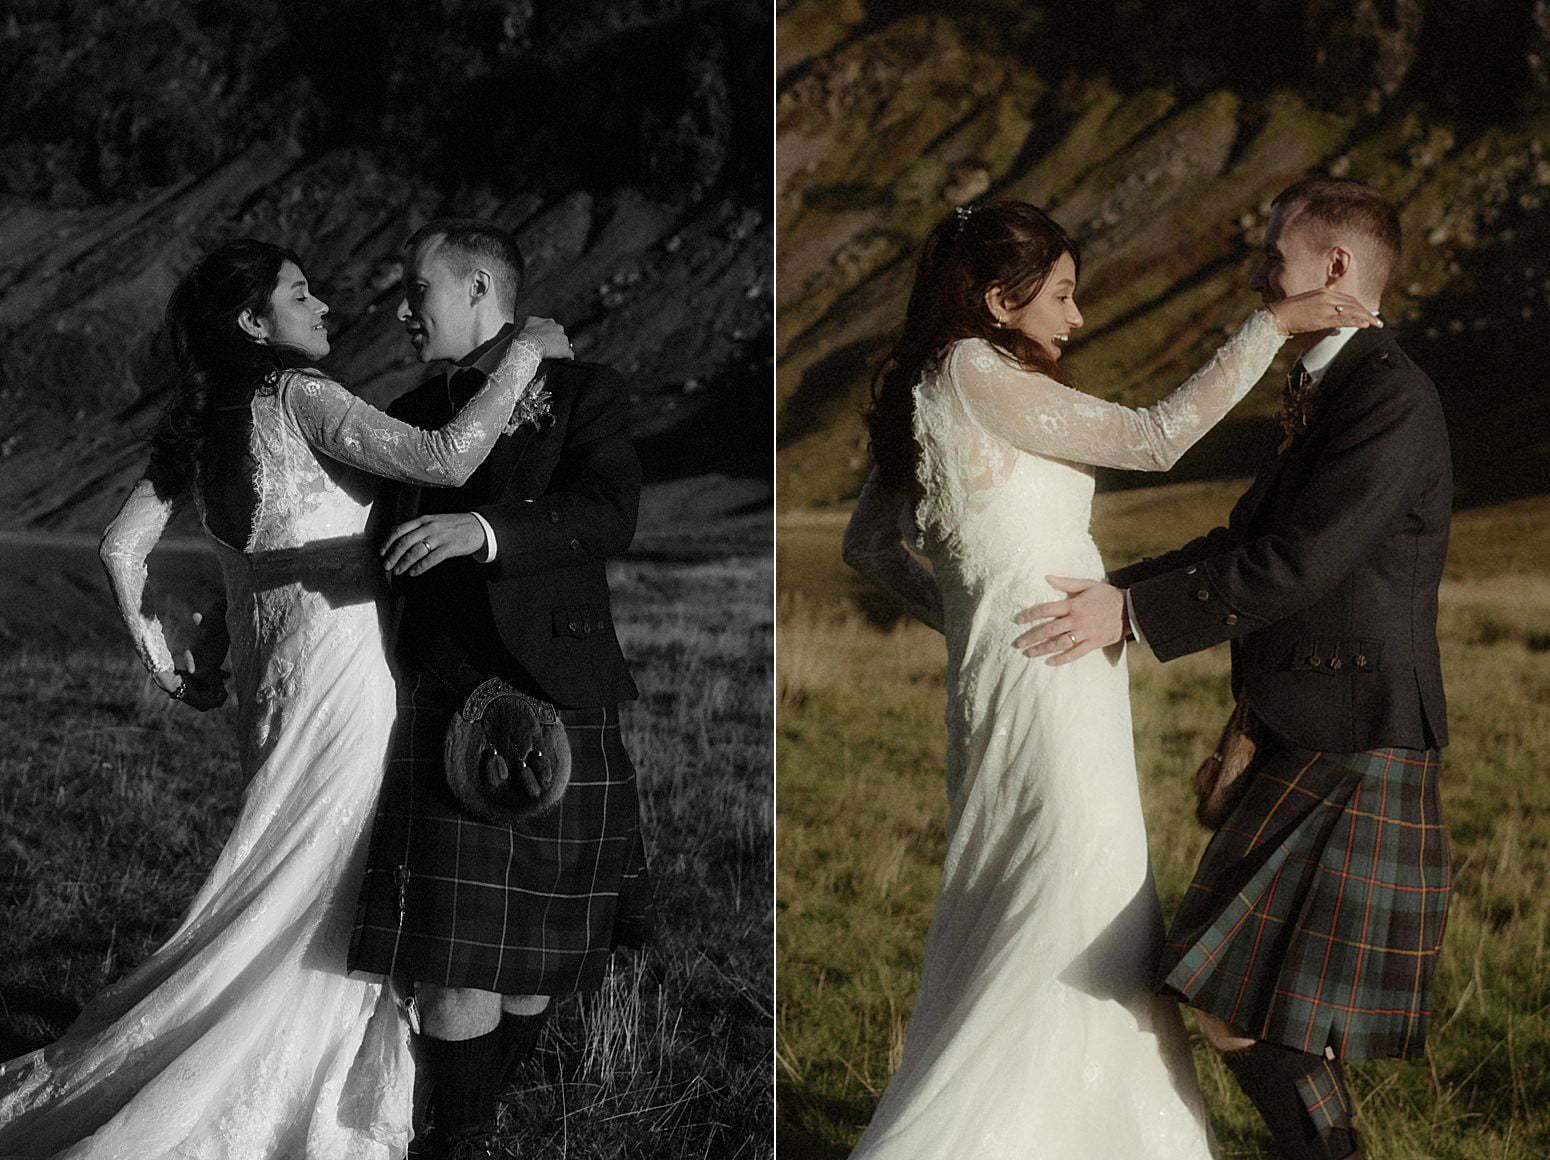 Autumn elopement in Scotland and a couple dancing in Glencoe